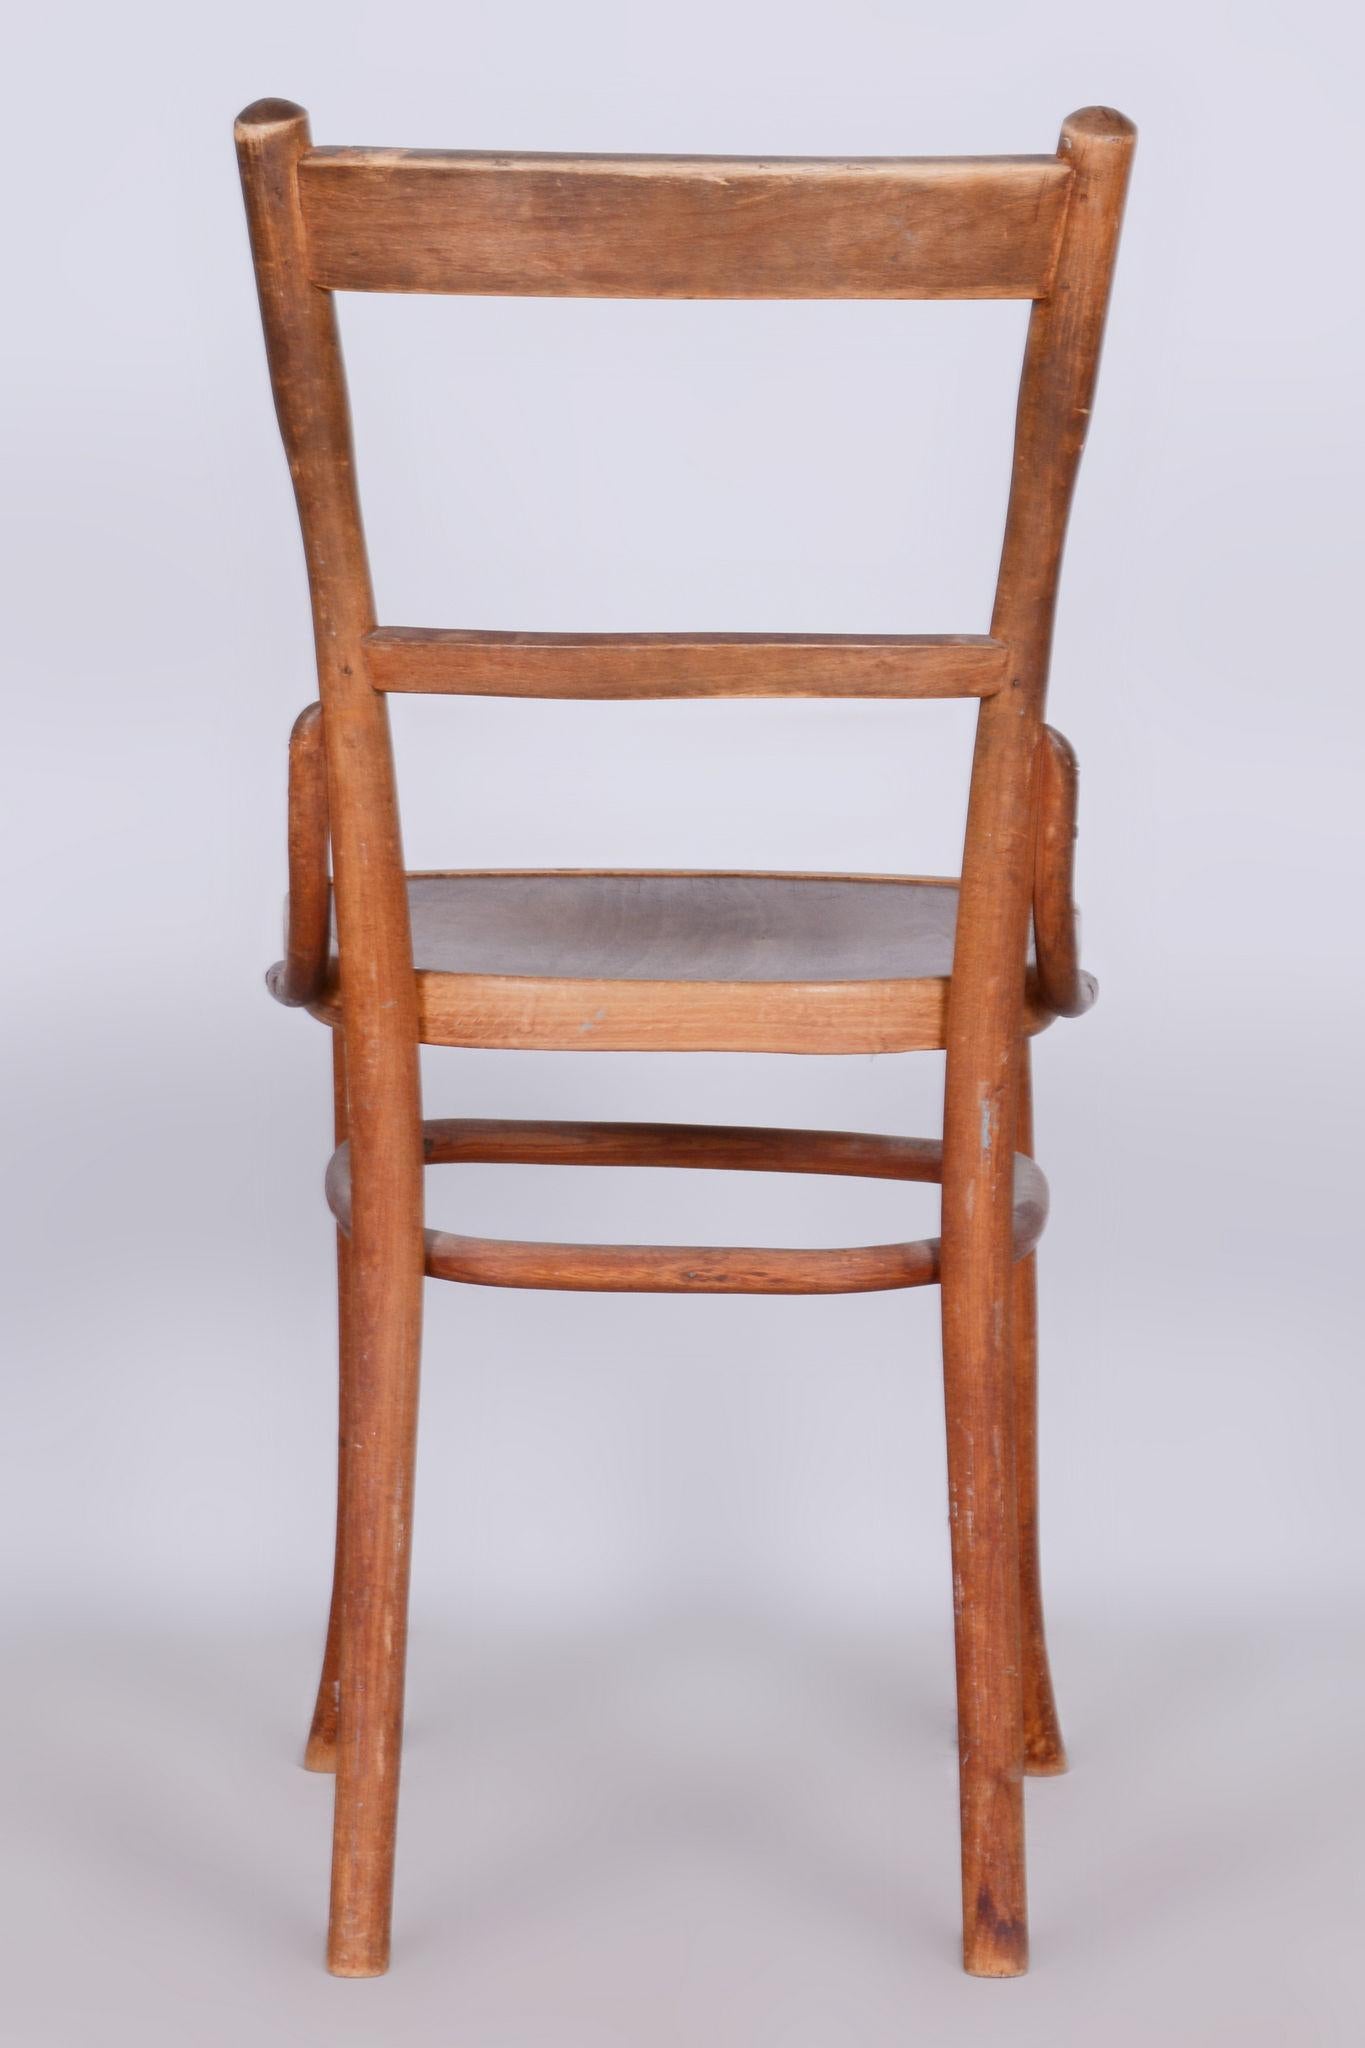 Original Art Deco Beech Chair Made By Fischel.

Maker: Fischel
Source: Czechia 
Period: 1920-1929
Material: Beech
Very well preserved condition.
Stable construction.

In pristine original condition, the item has been professionally cleaned, and its